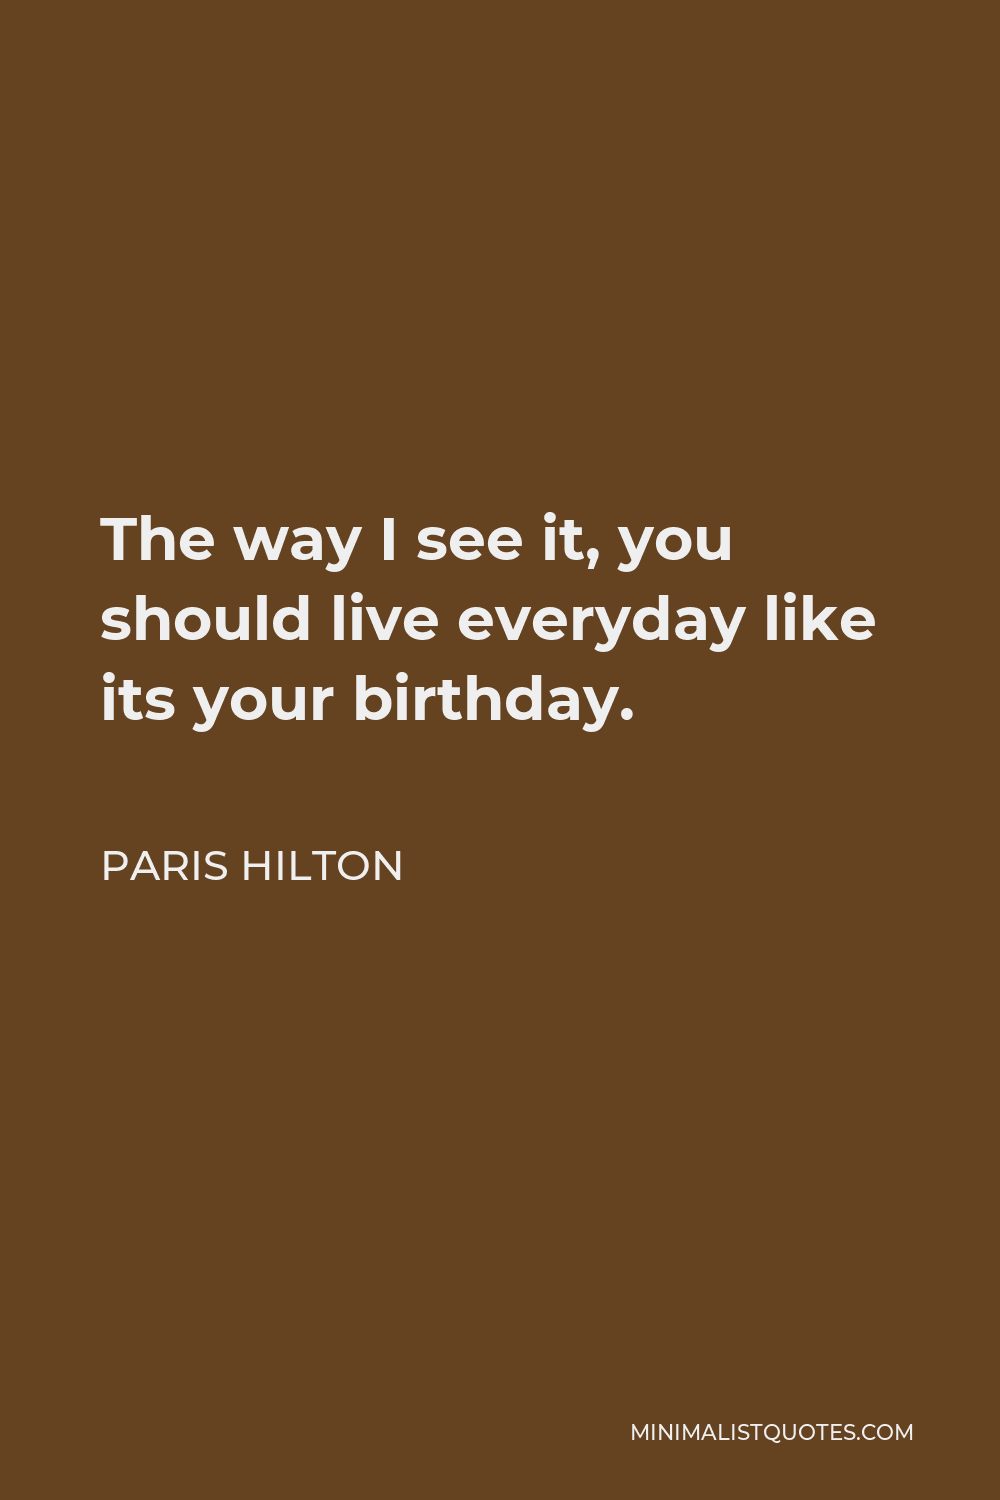 Paris Hilton Quote - The way I see it, you should live everyday like its your birthday.